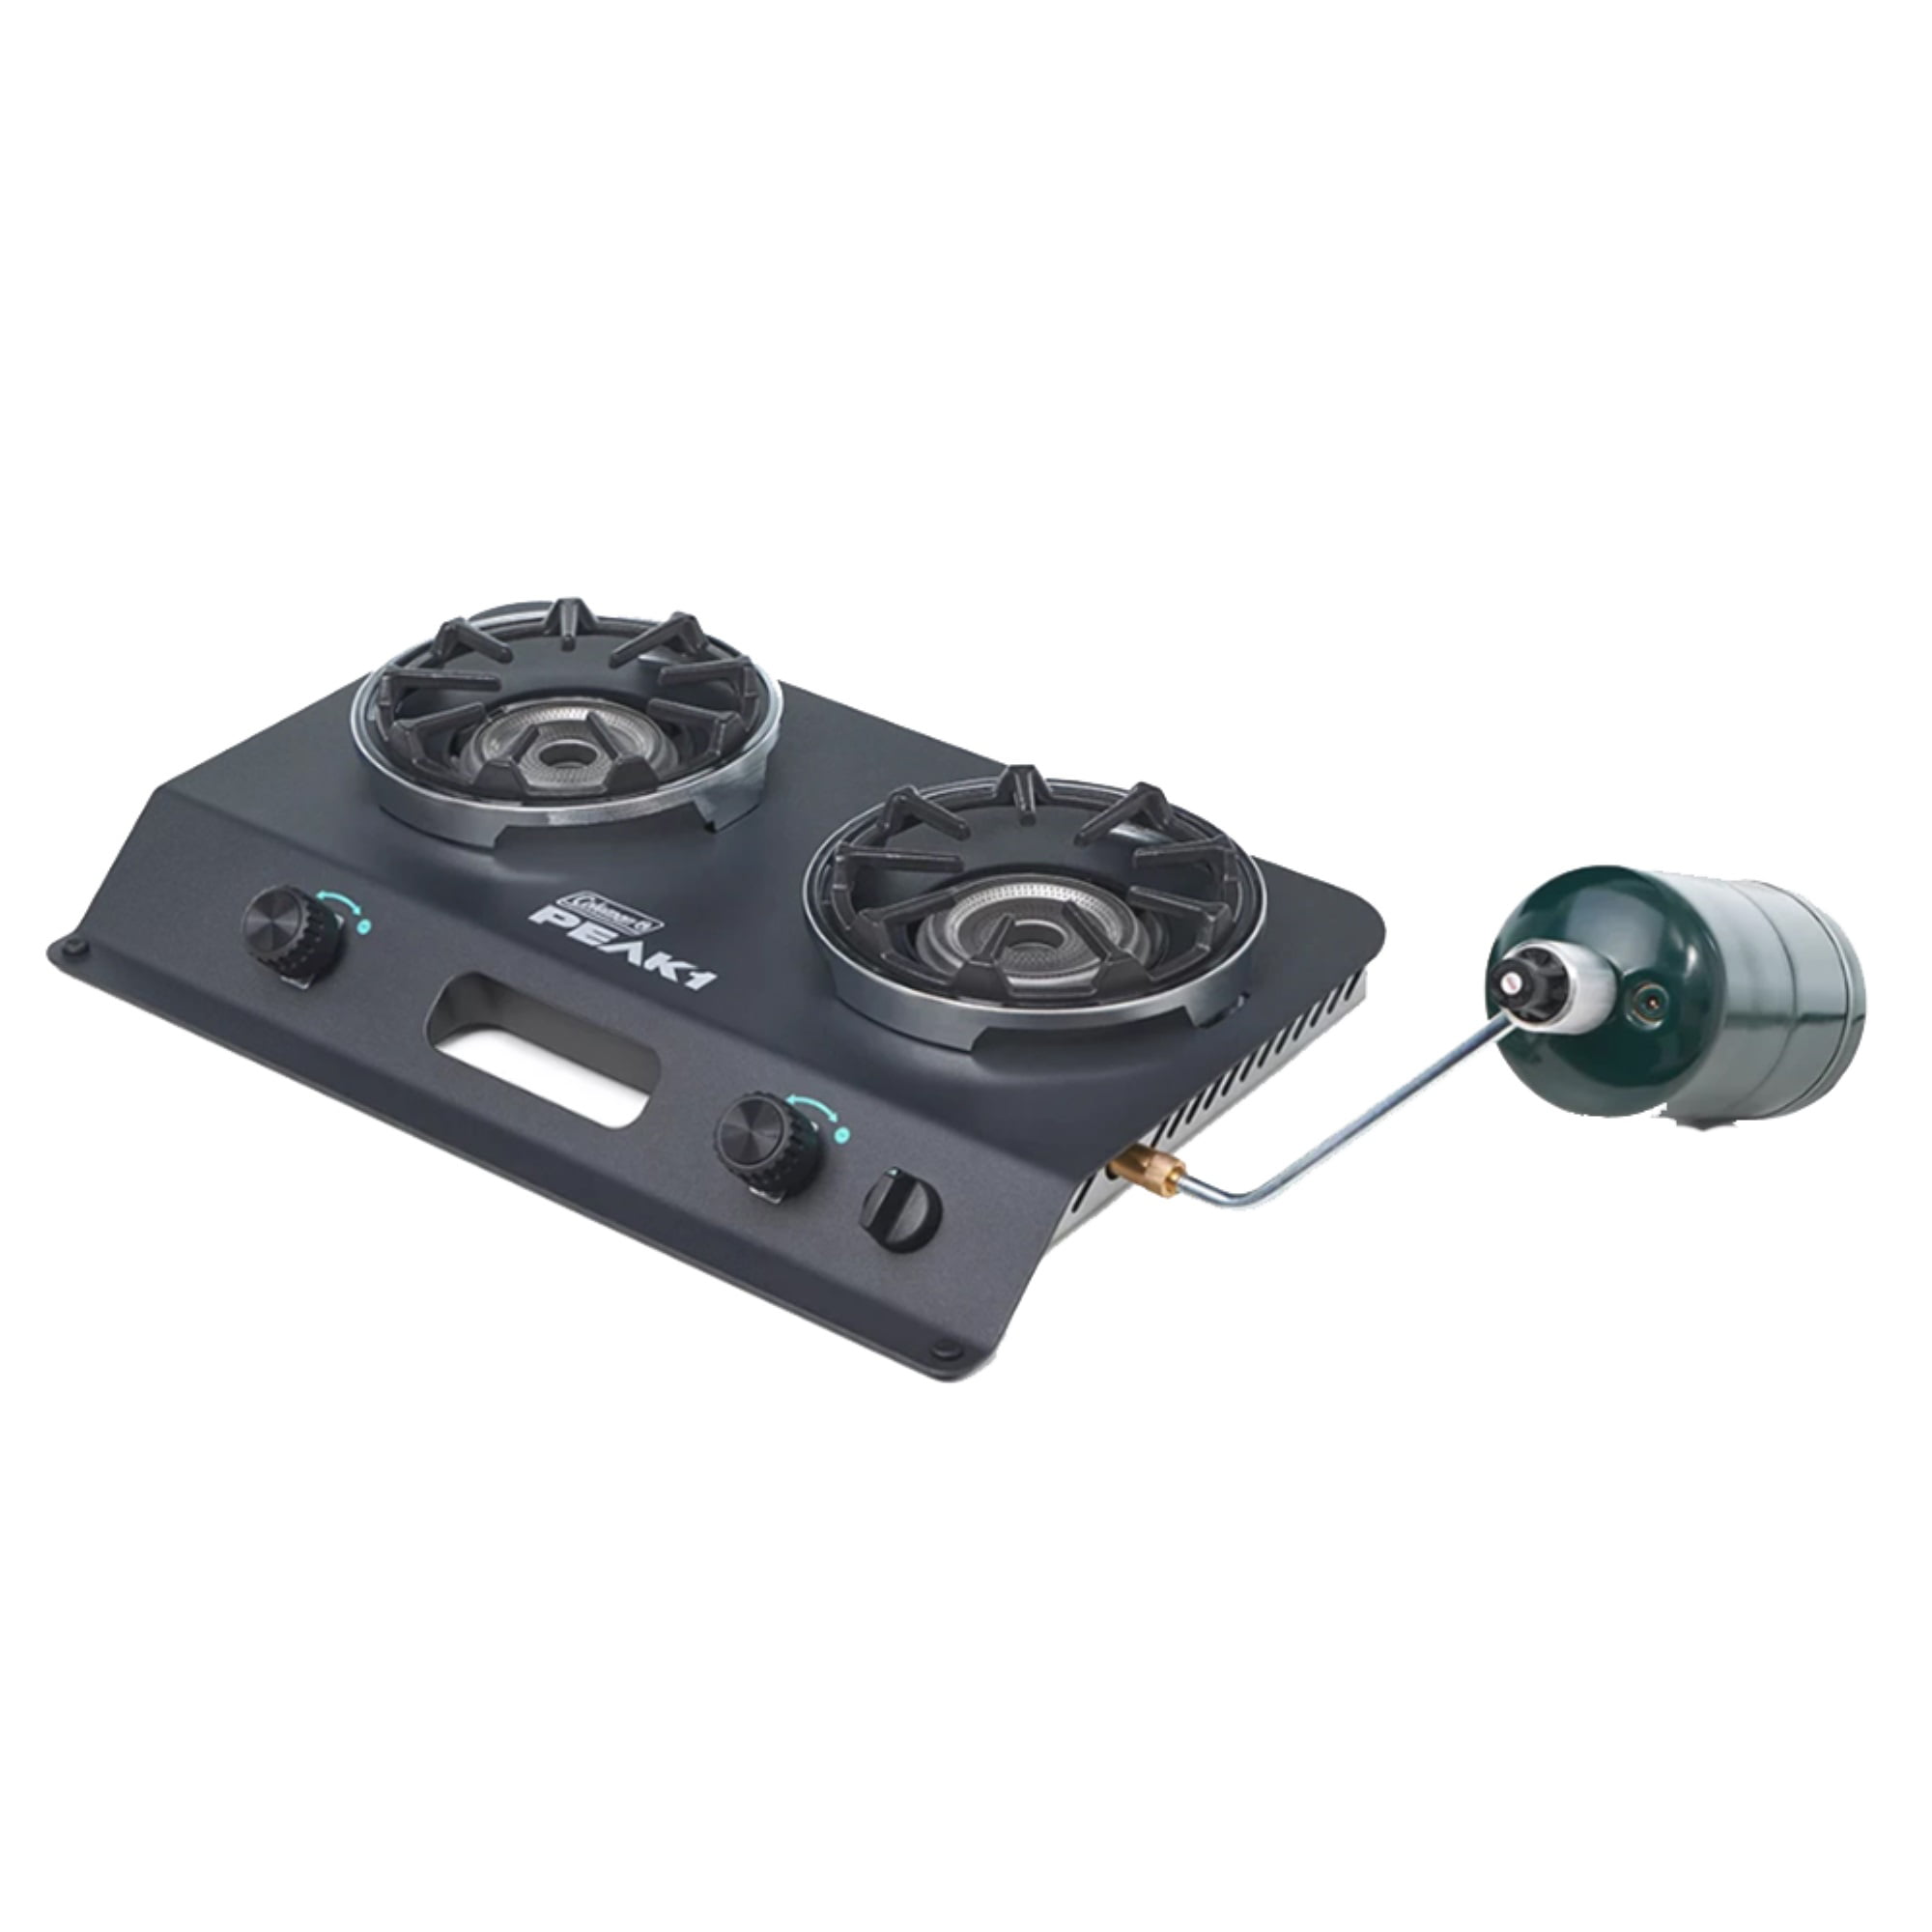 Glacier's Edge Two Burner Camping Stove, 1 ct - Fred Meyer